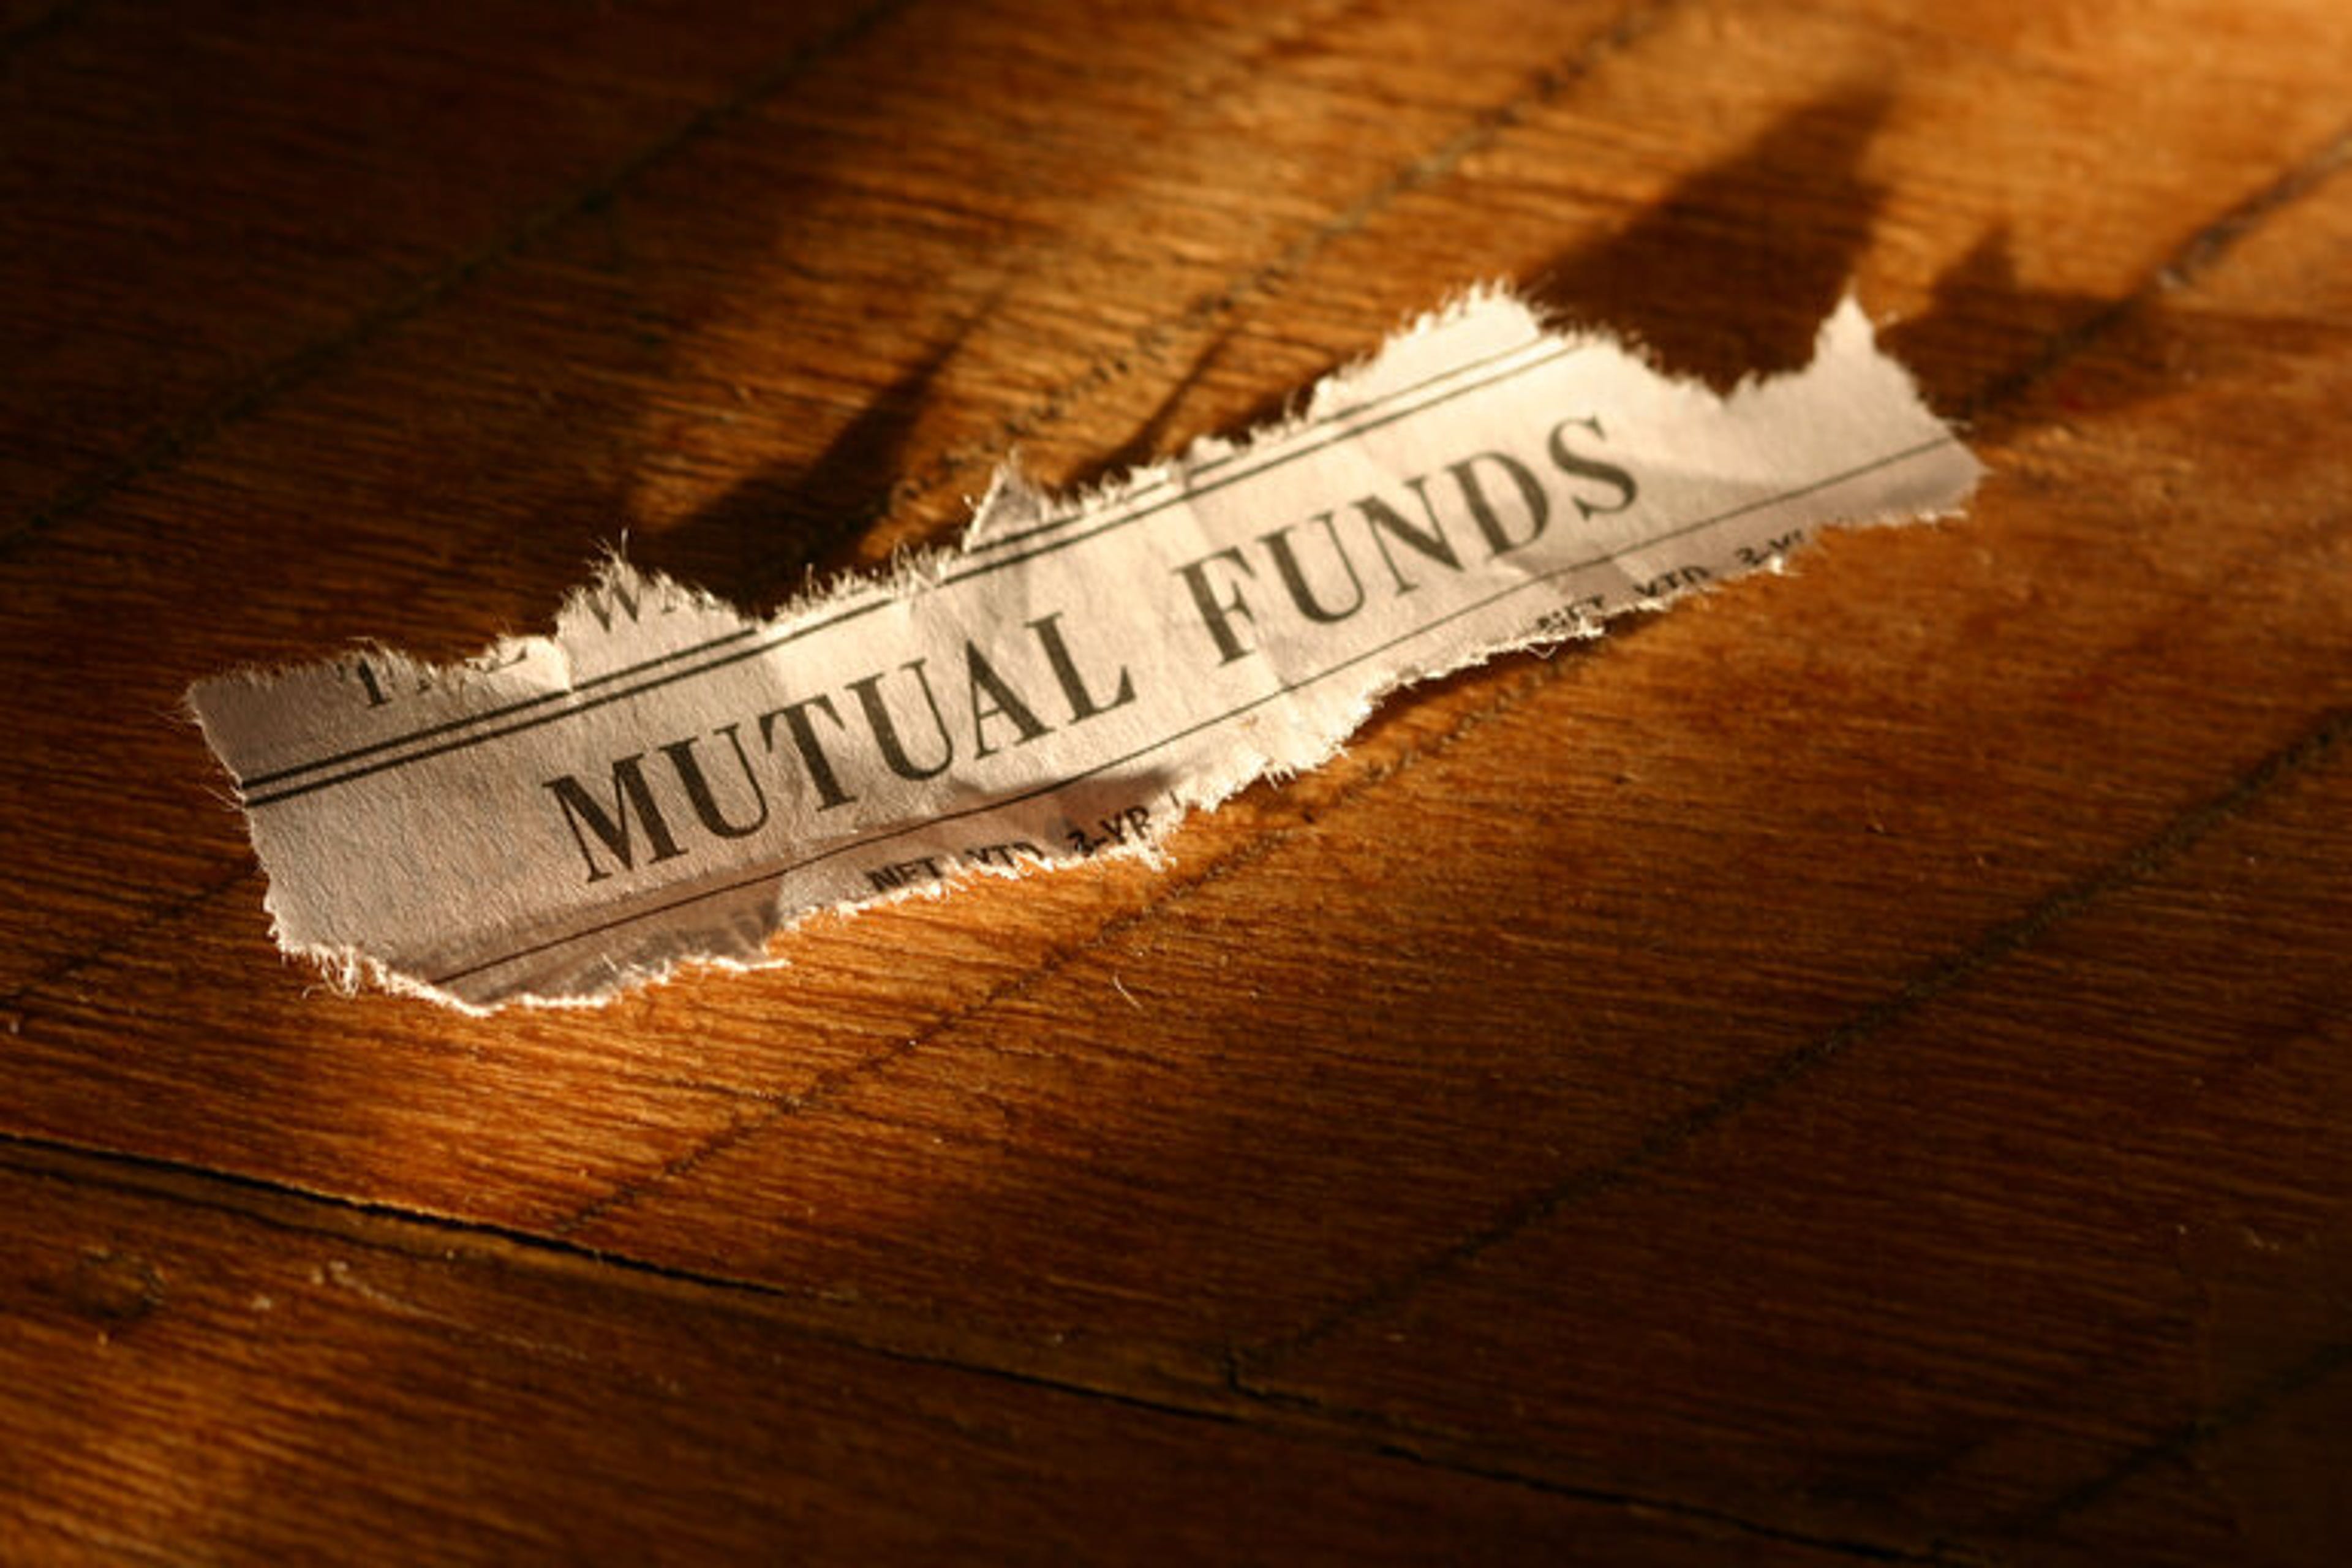 Pool of funds invested in stocks, bonds & securities